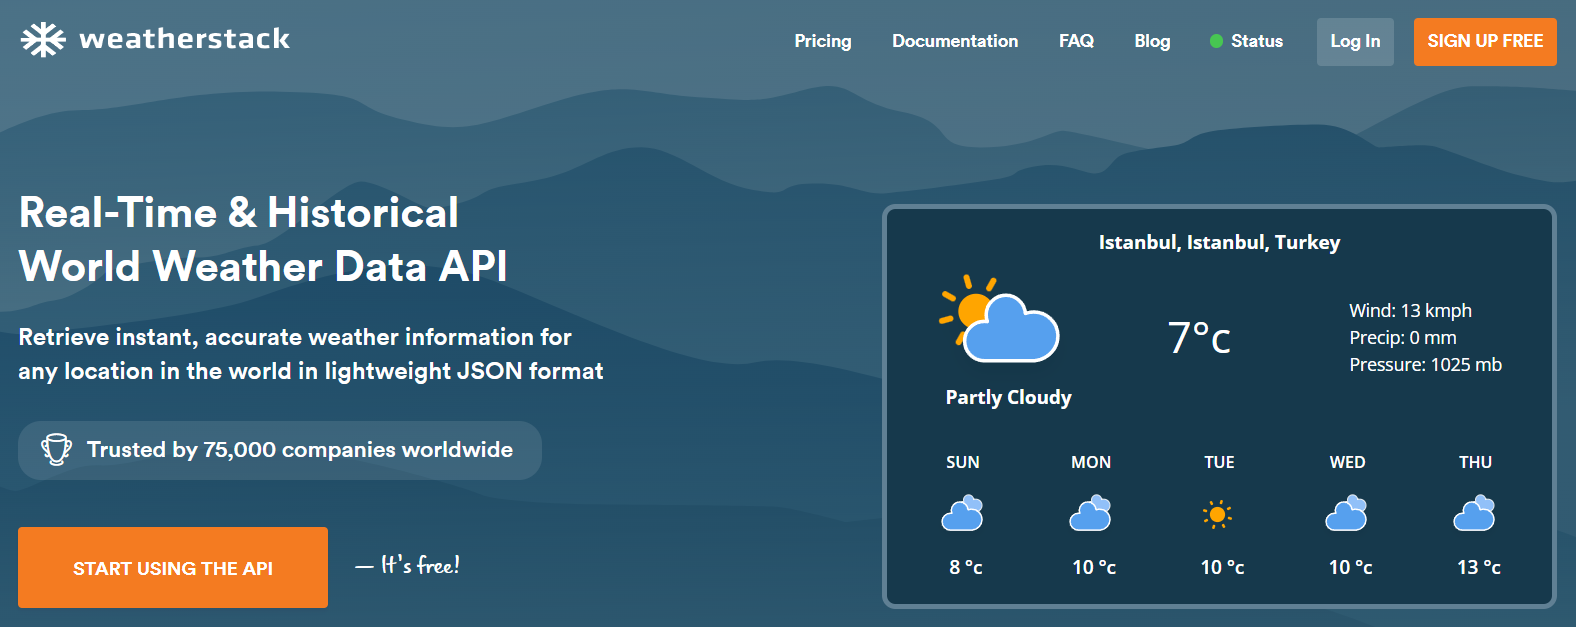 home page of the weatherstack event planning weather api